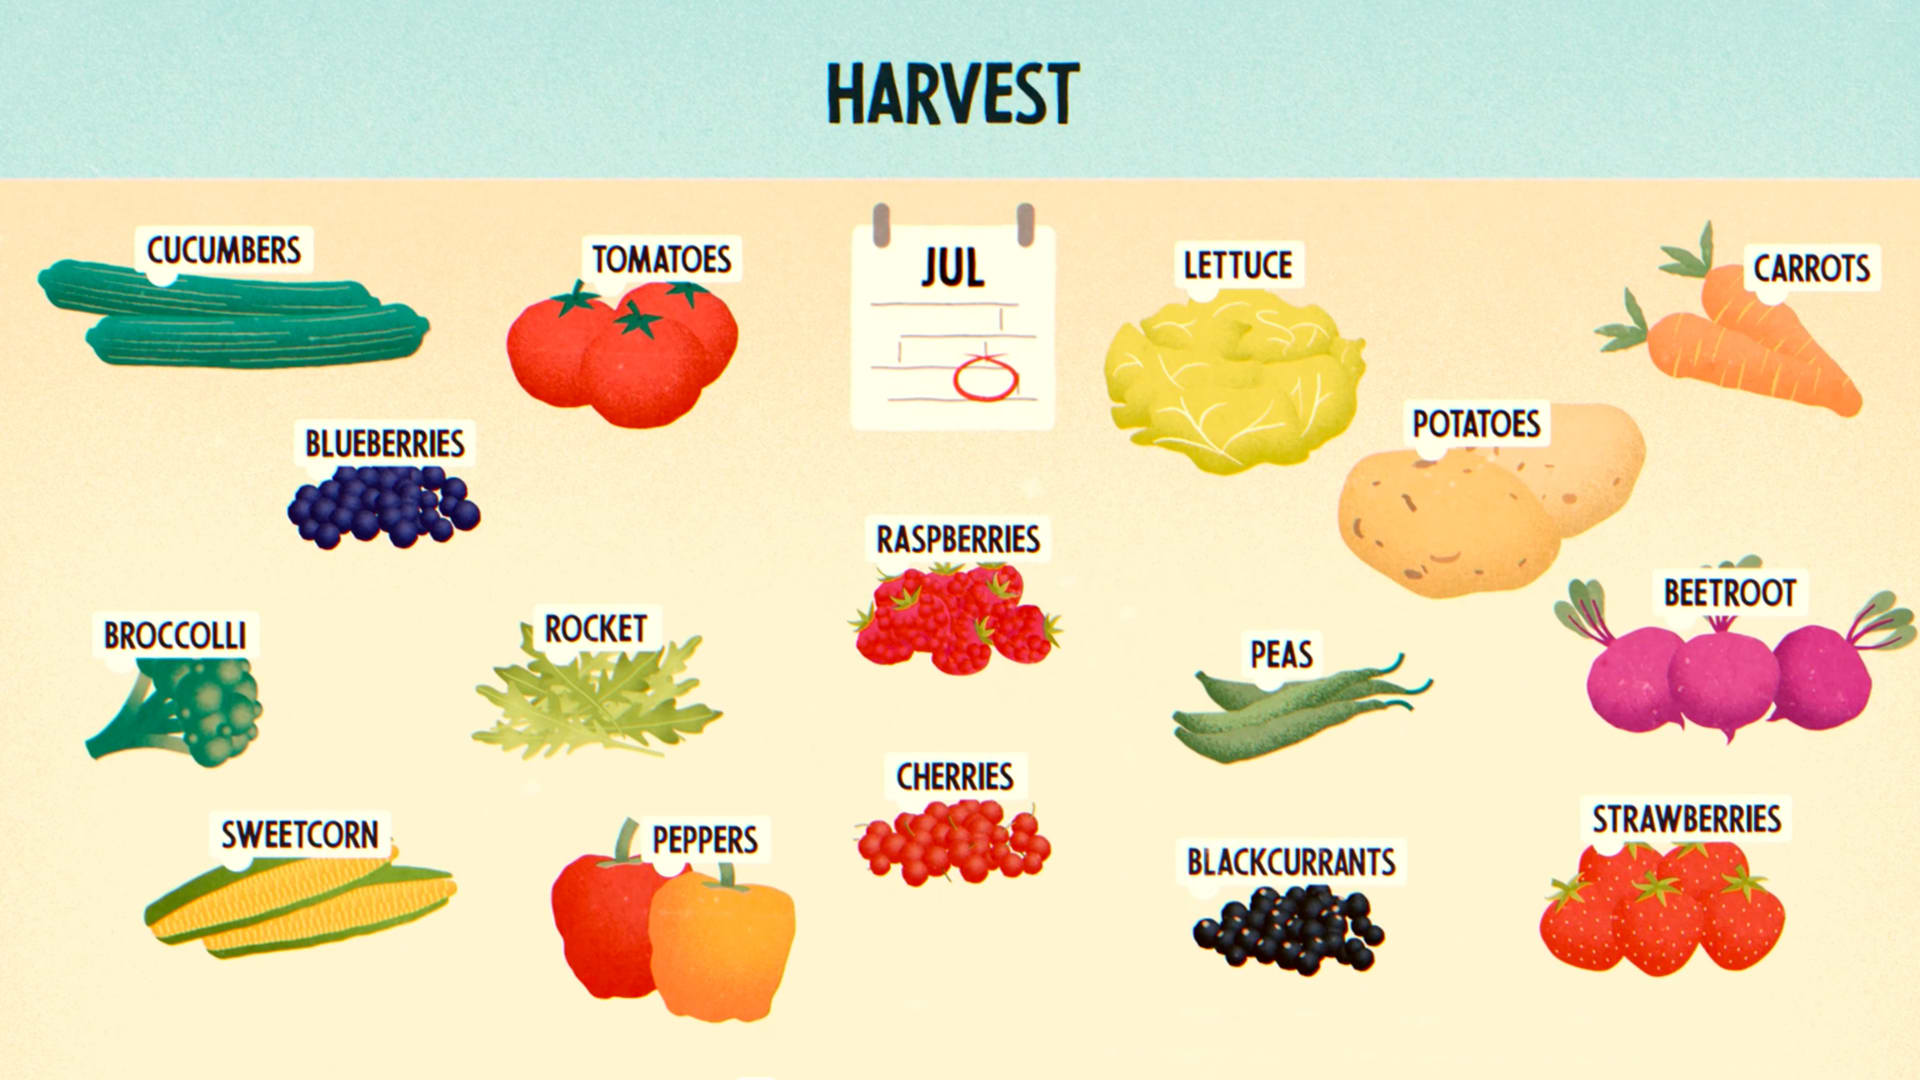 <h2>When to Plant and Harvest Fruit and Veg in the UK</h2>